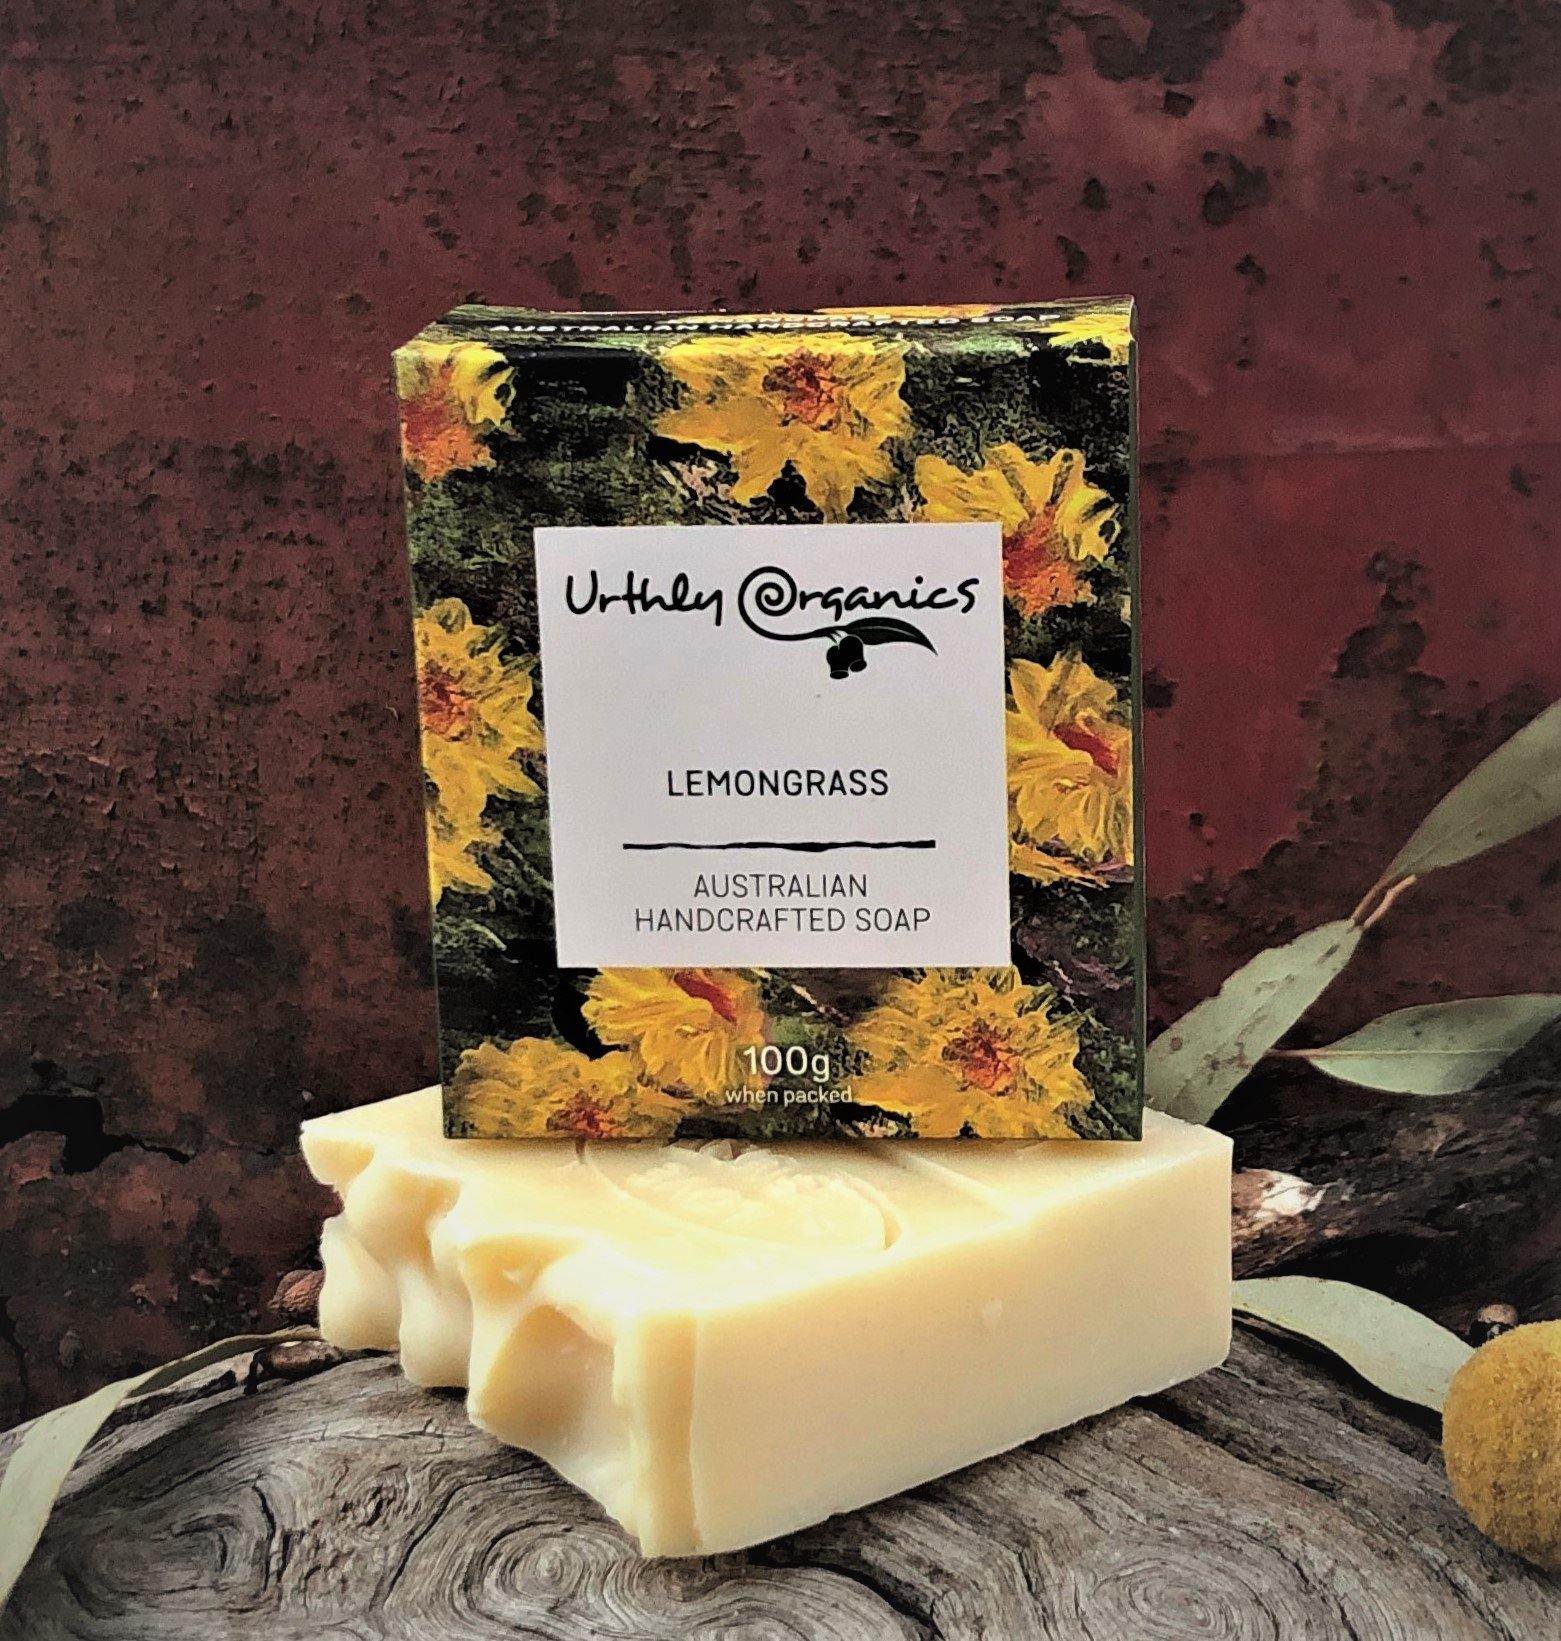 Lemongrass - UrthlyOrganics Natural ethical skincare and cleaning